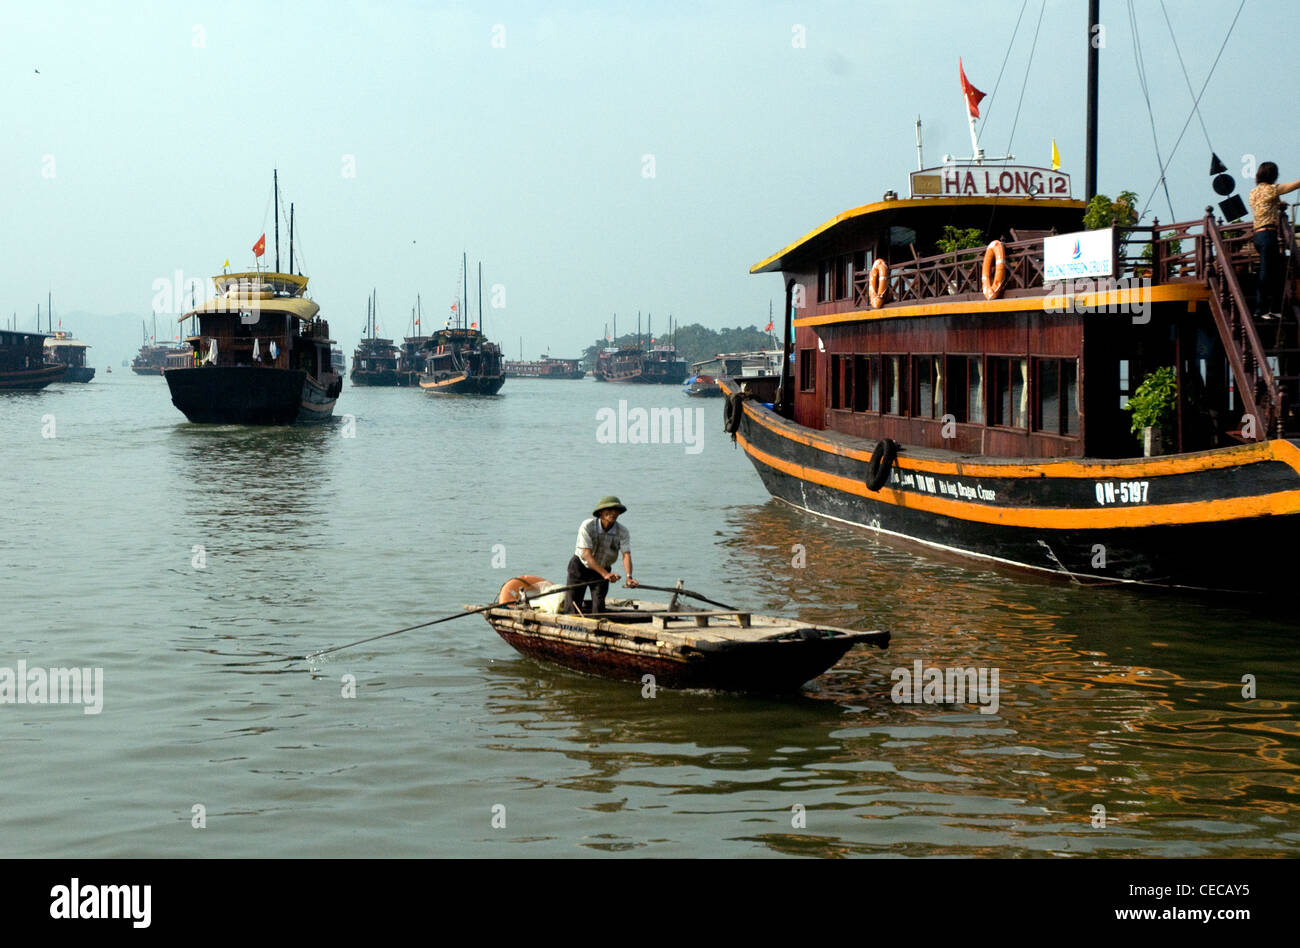 In Vietnam's Ha Long bay a rowboat contrasts with converted junks at anchor near the main port Stock Photo